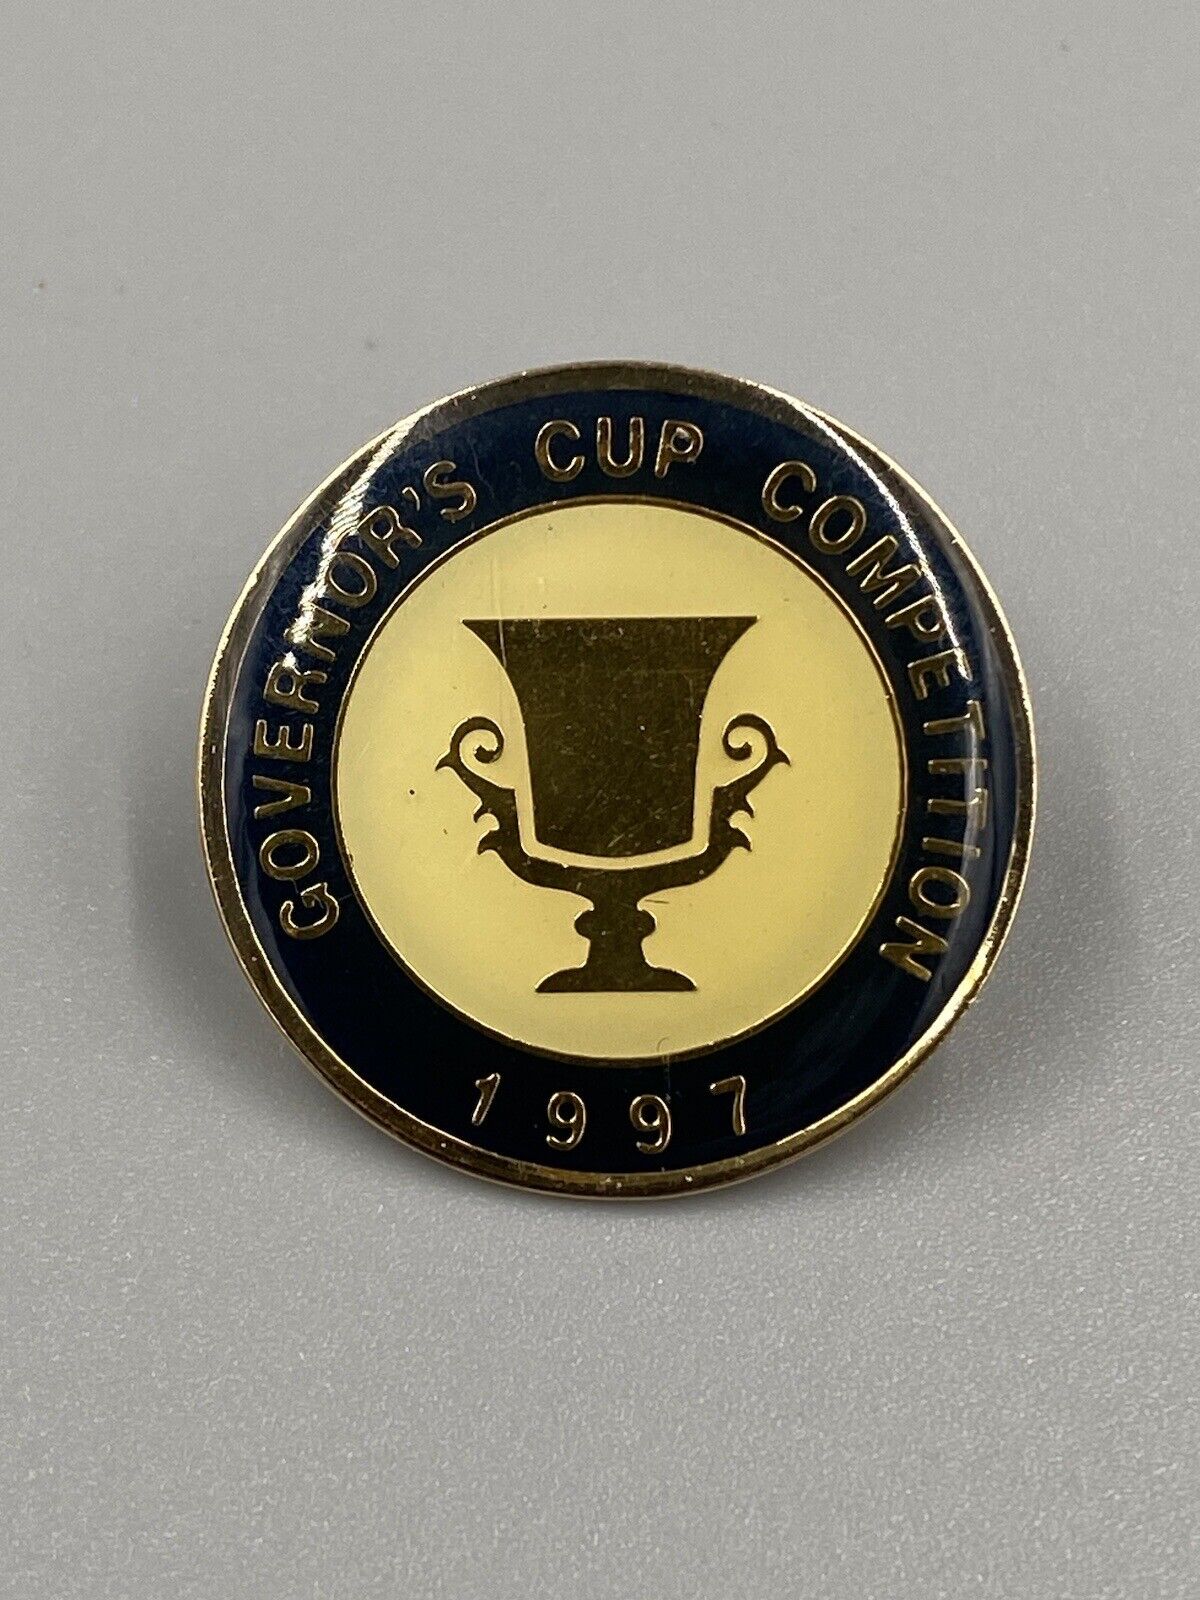 Vintage 1997 Governors Cup Competition Lapel Hat Pin